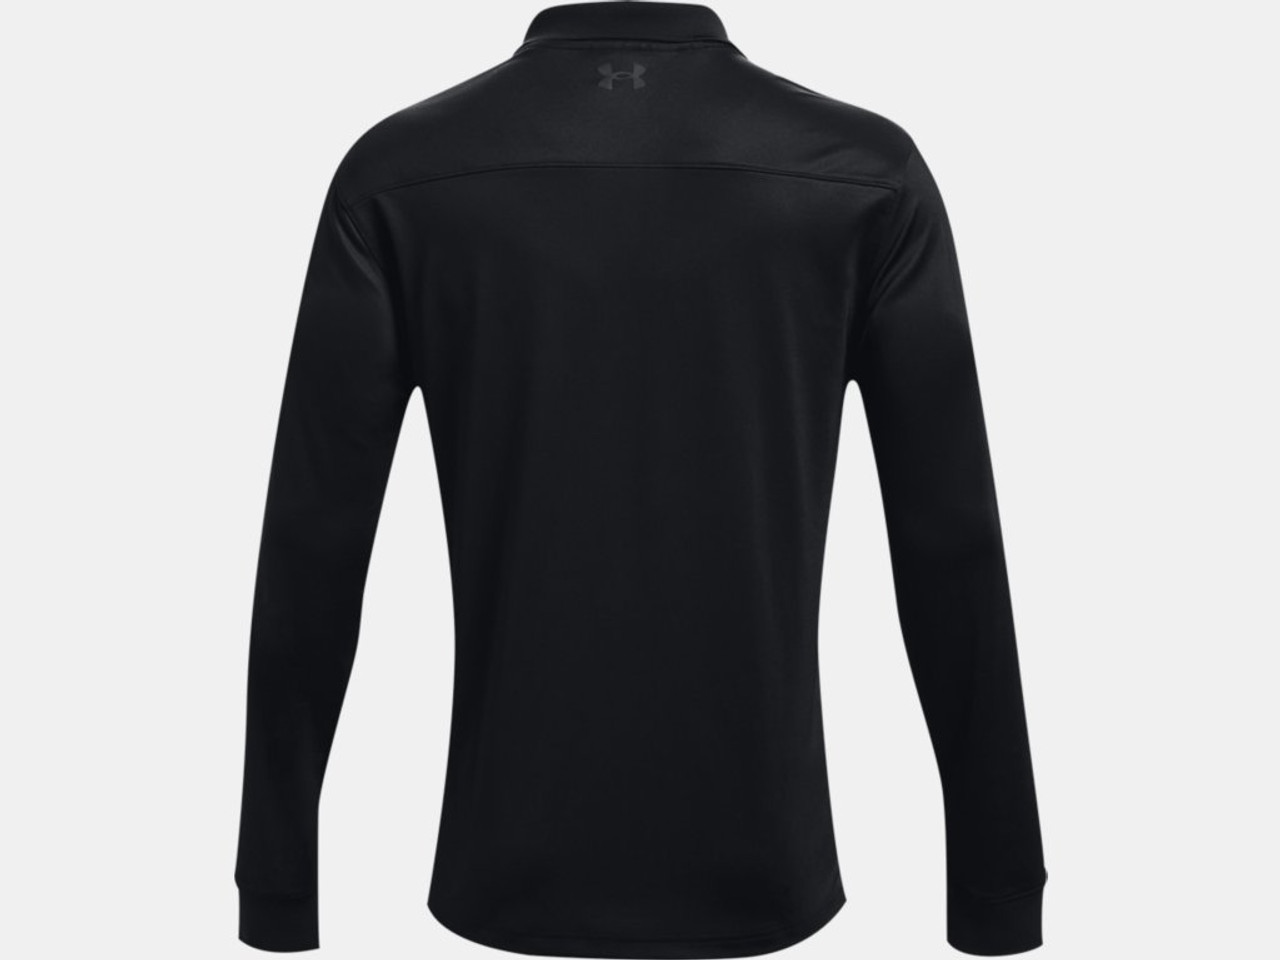 Under Armour Men's Tactical Performance Long Sleeve Polo 2.0